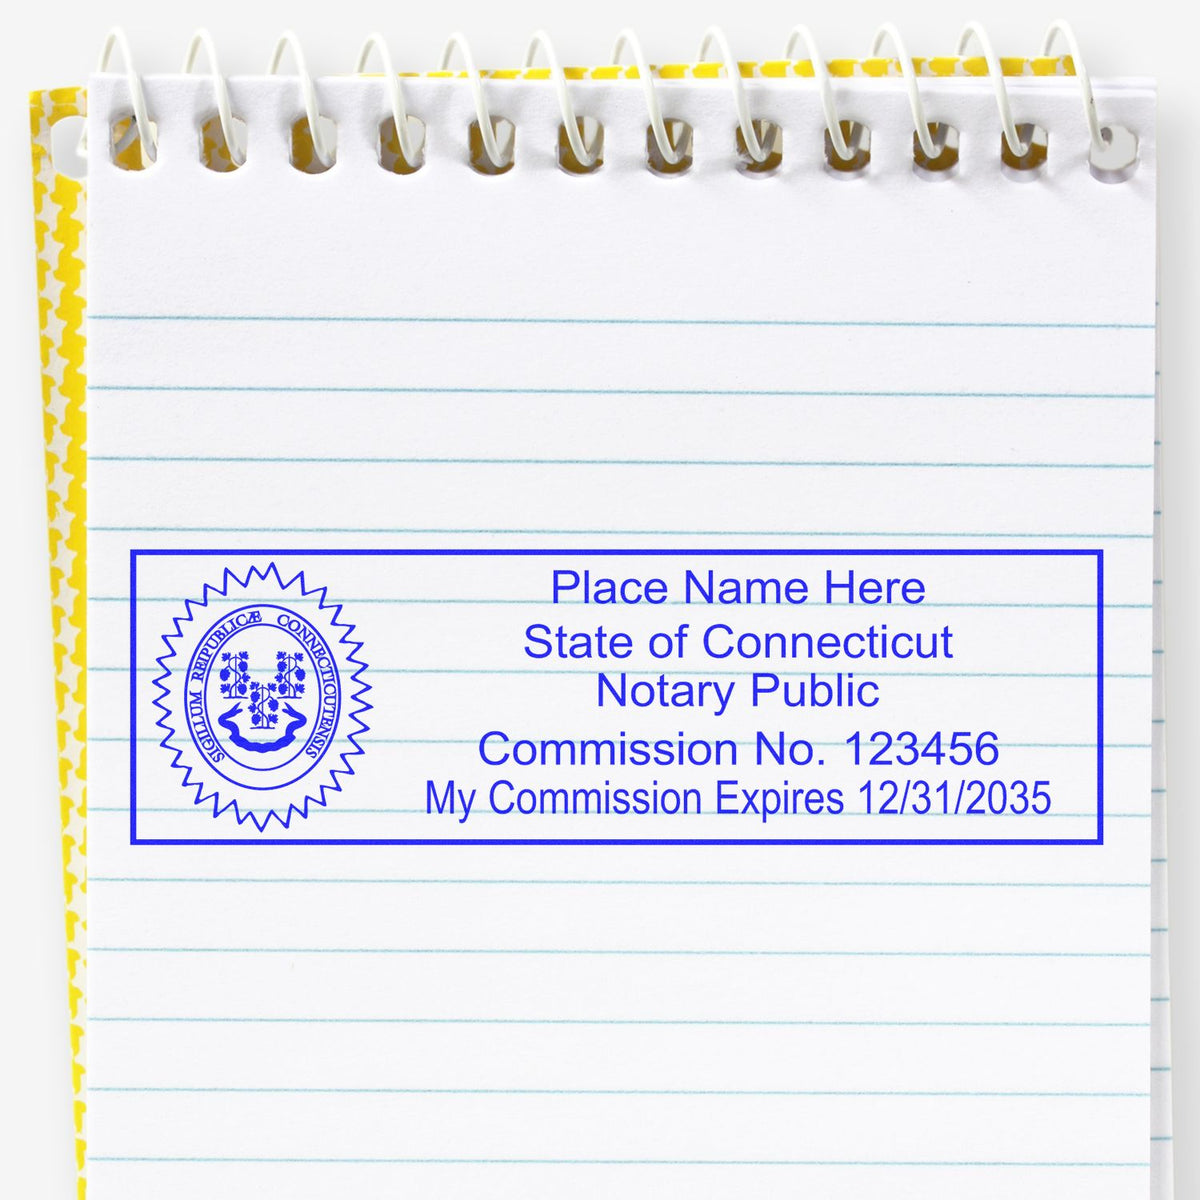 This paper is stamped with a sample imprint of the Wooden Handle Connecticut State Seal Notary Public Stamp, signifying its quality and reliability.